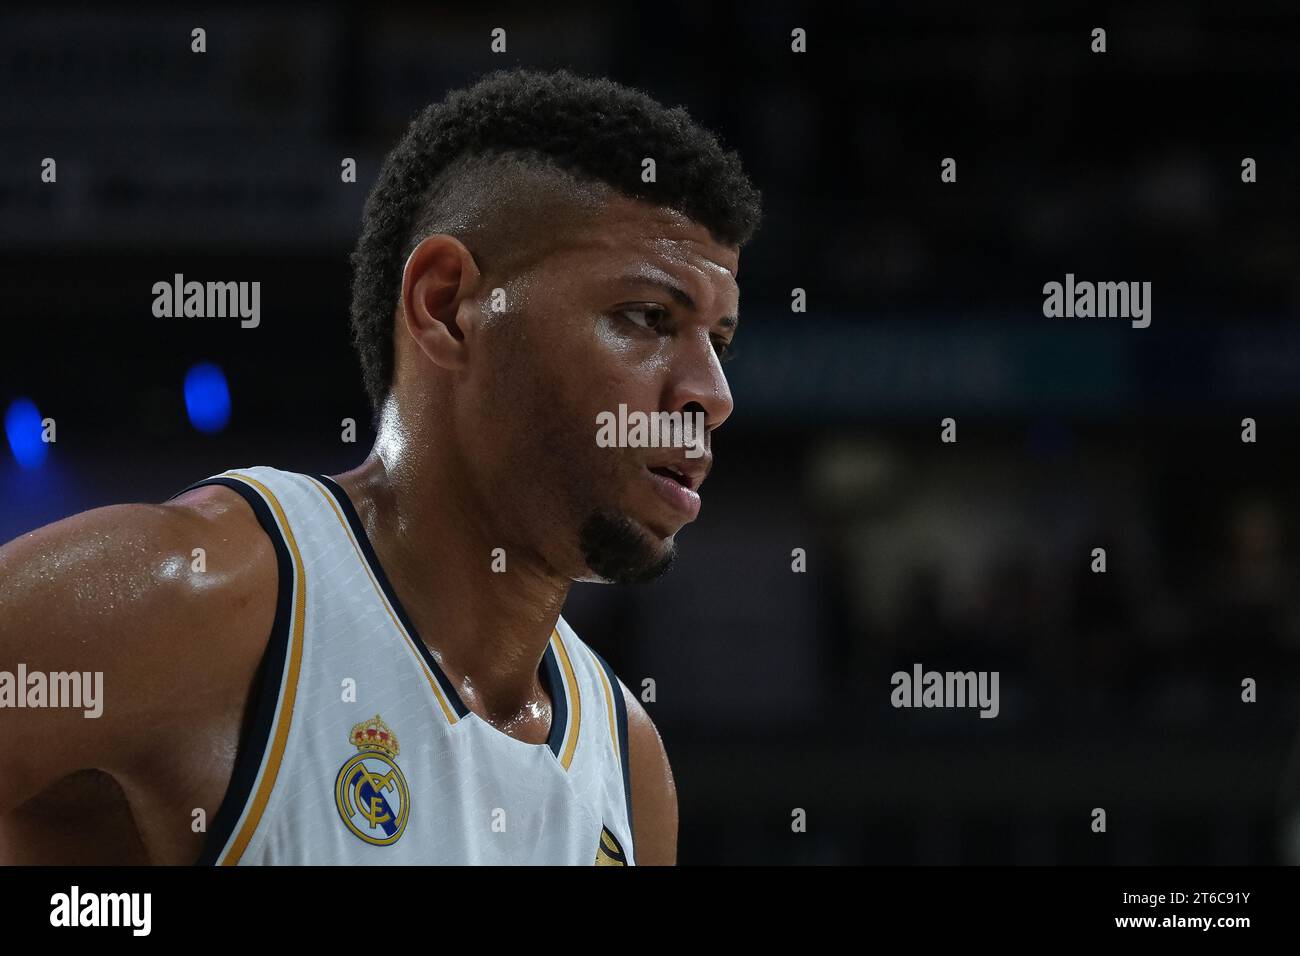 Edy Tavares  of Real Madrid  during the Turkish Airlines EuroLeague  match between Real Madrid and Virtus Segafredo Bologna at WiZink Center on Novemb Stock Photo